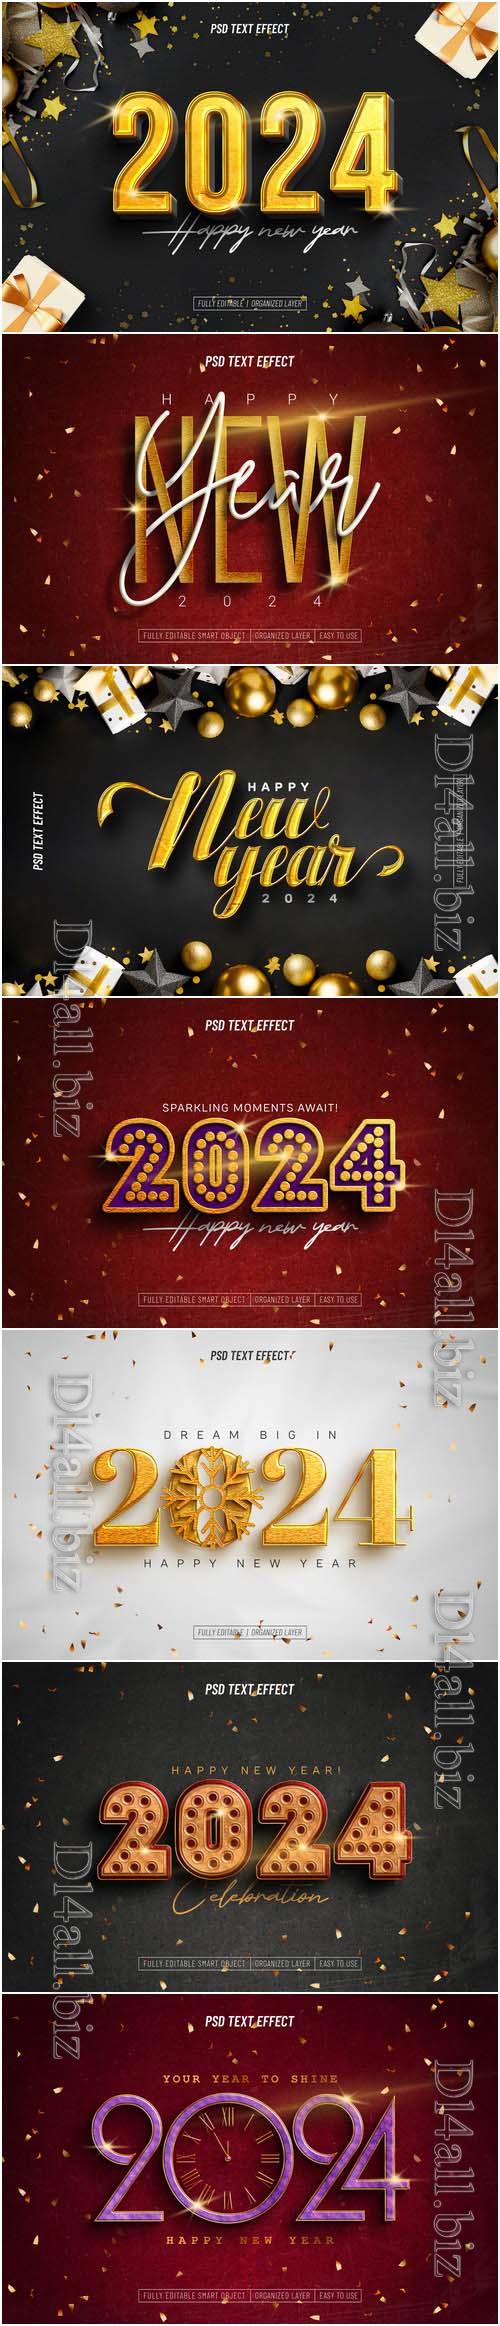 2024 Happy new year text effect vol 3